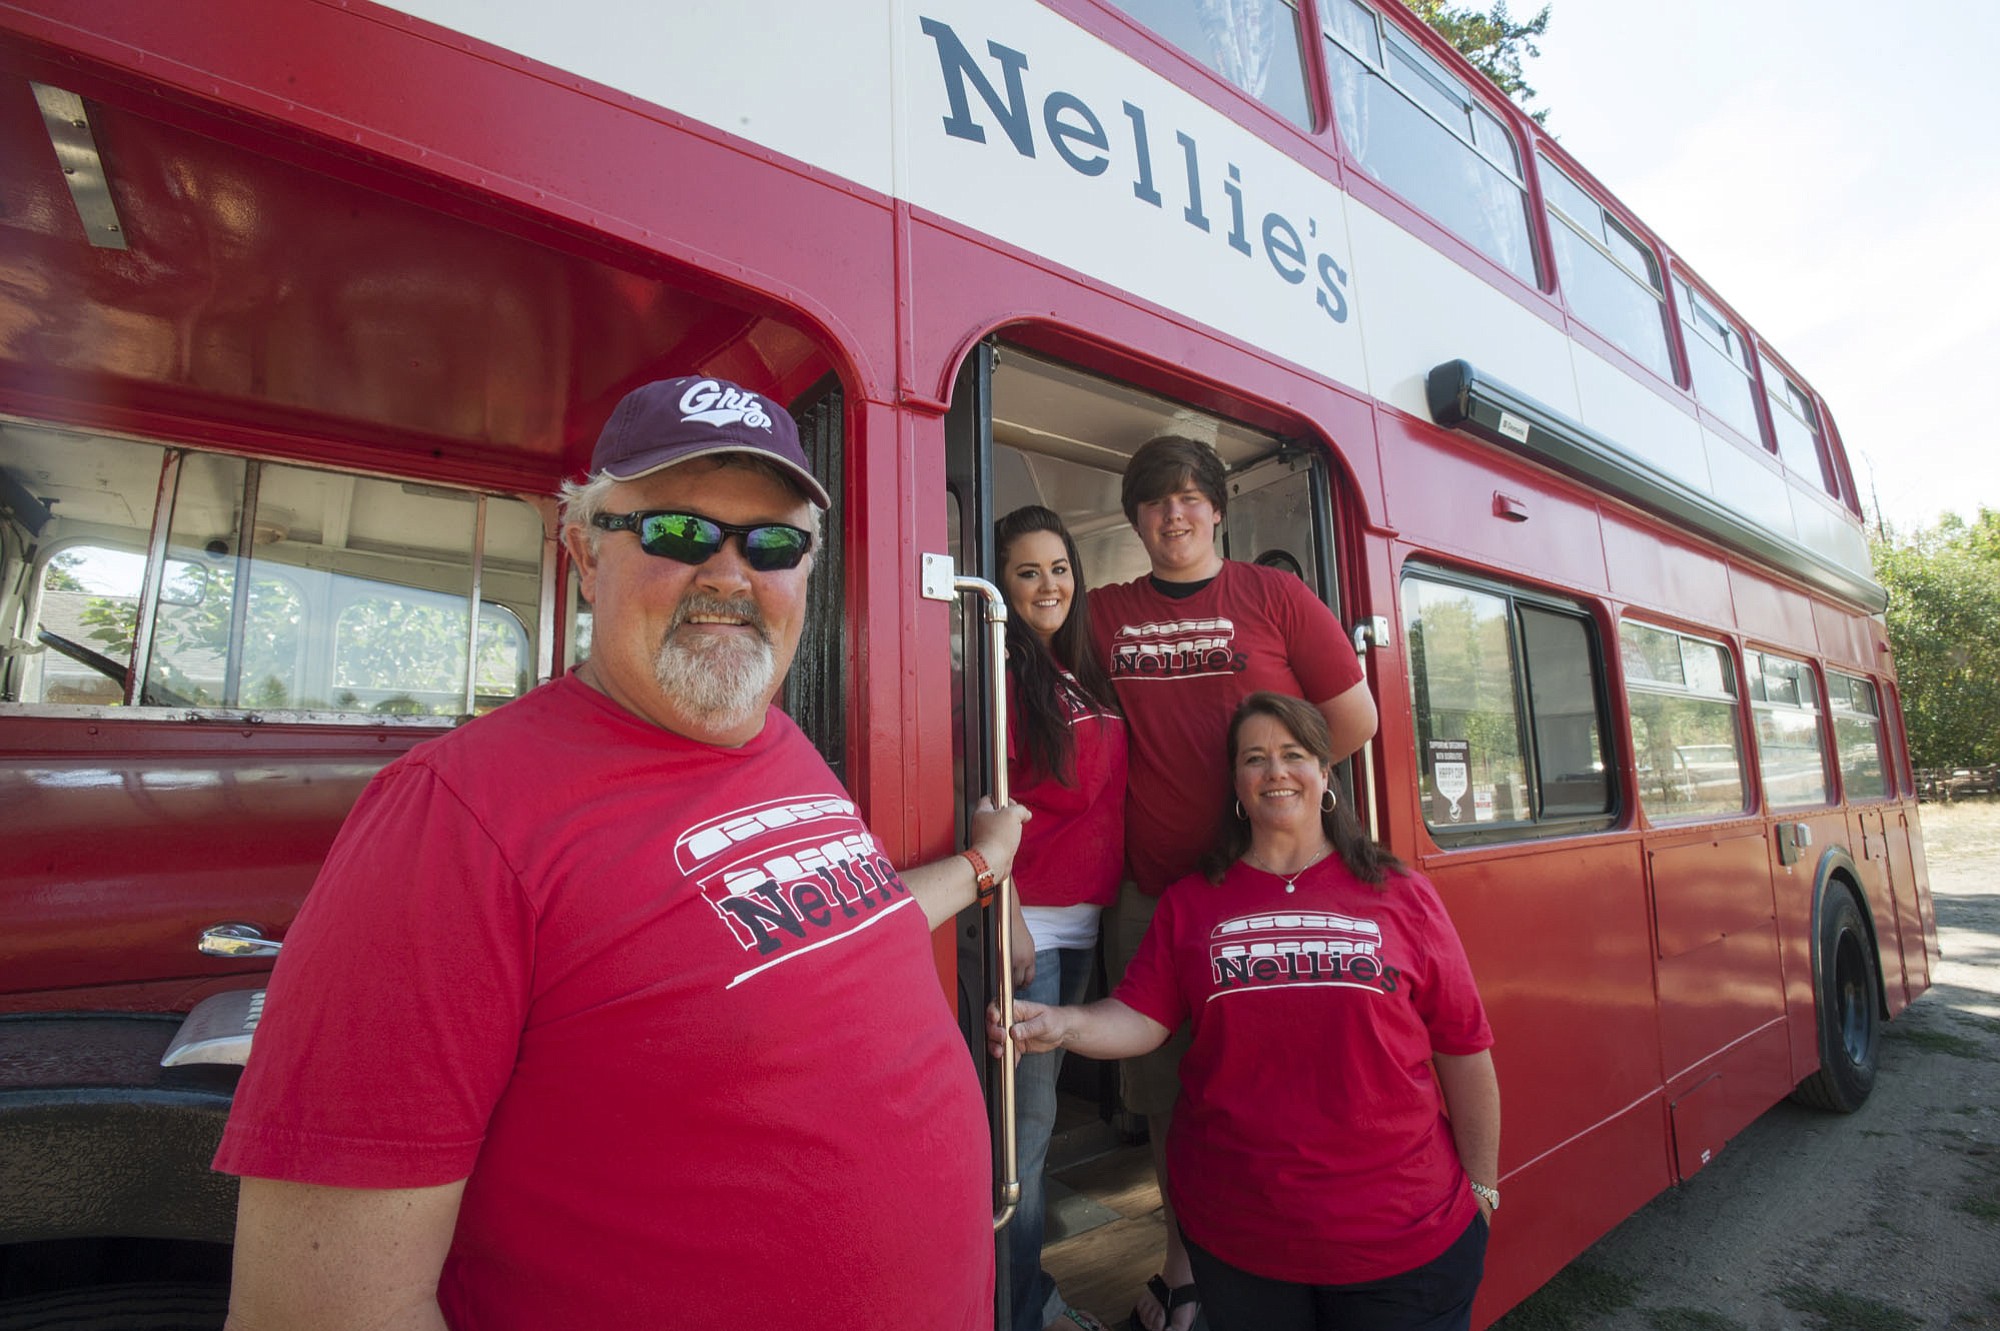 David Sale, left, and his daughter, Kayla; son, Joshua; and wife, Jeannette, restored a double-decker bus and transformed it into a food cart.